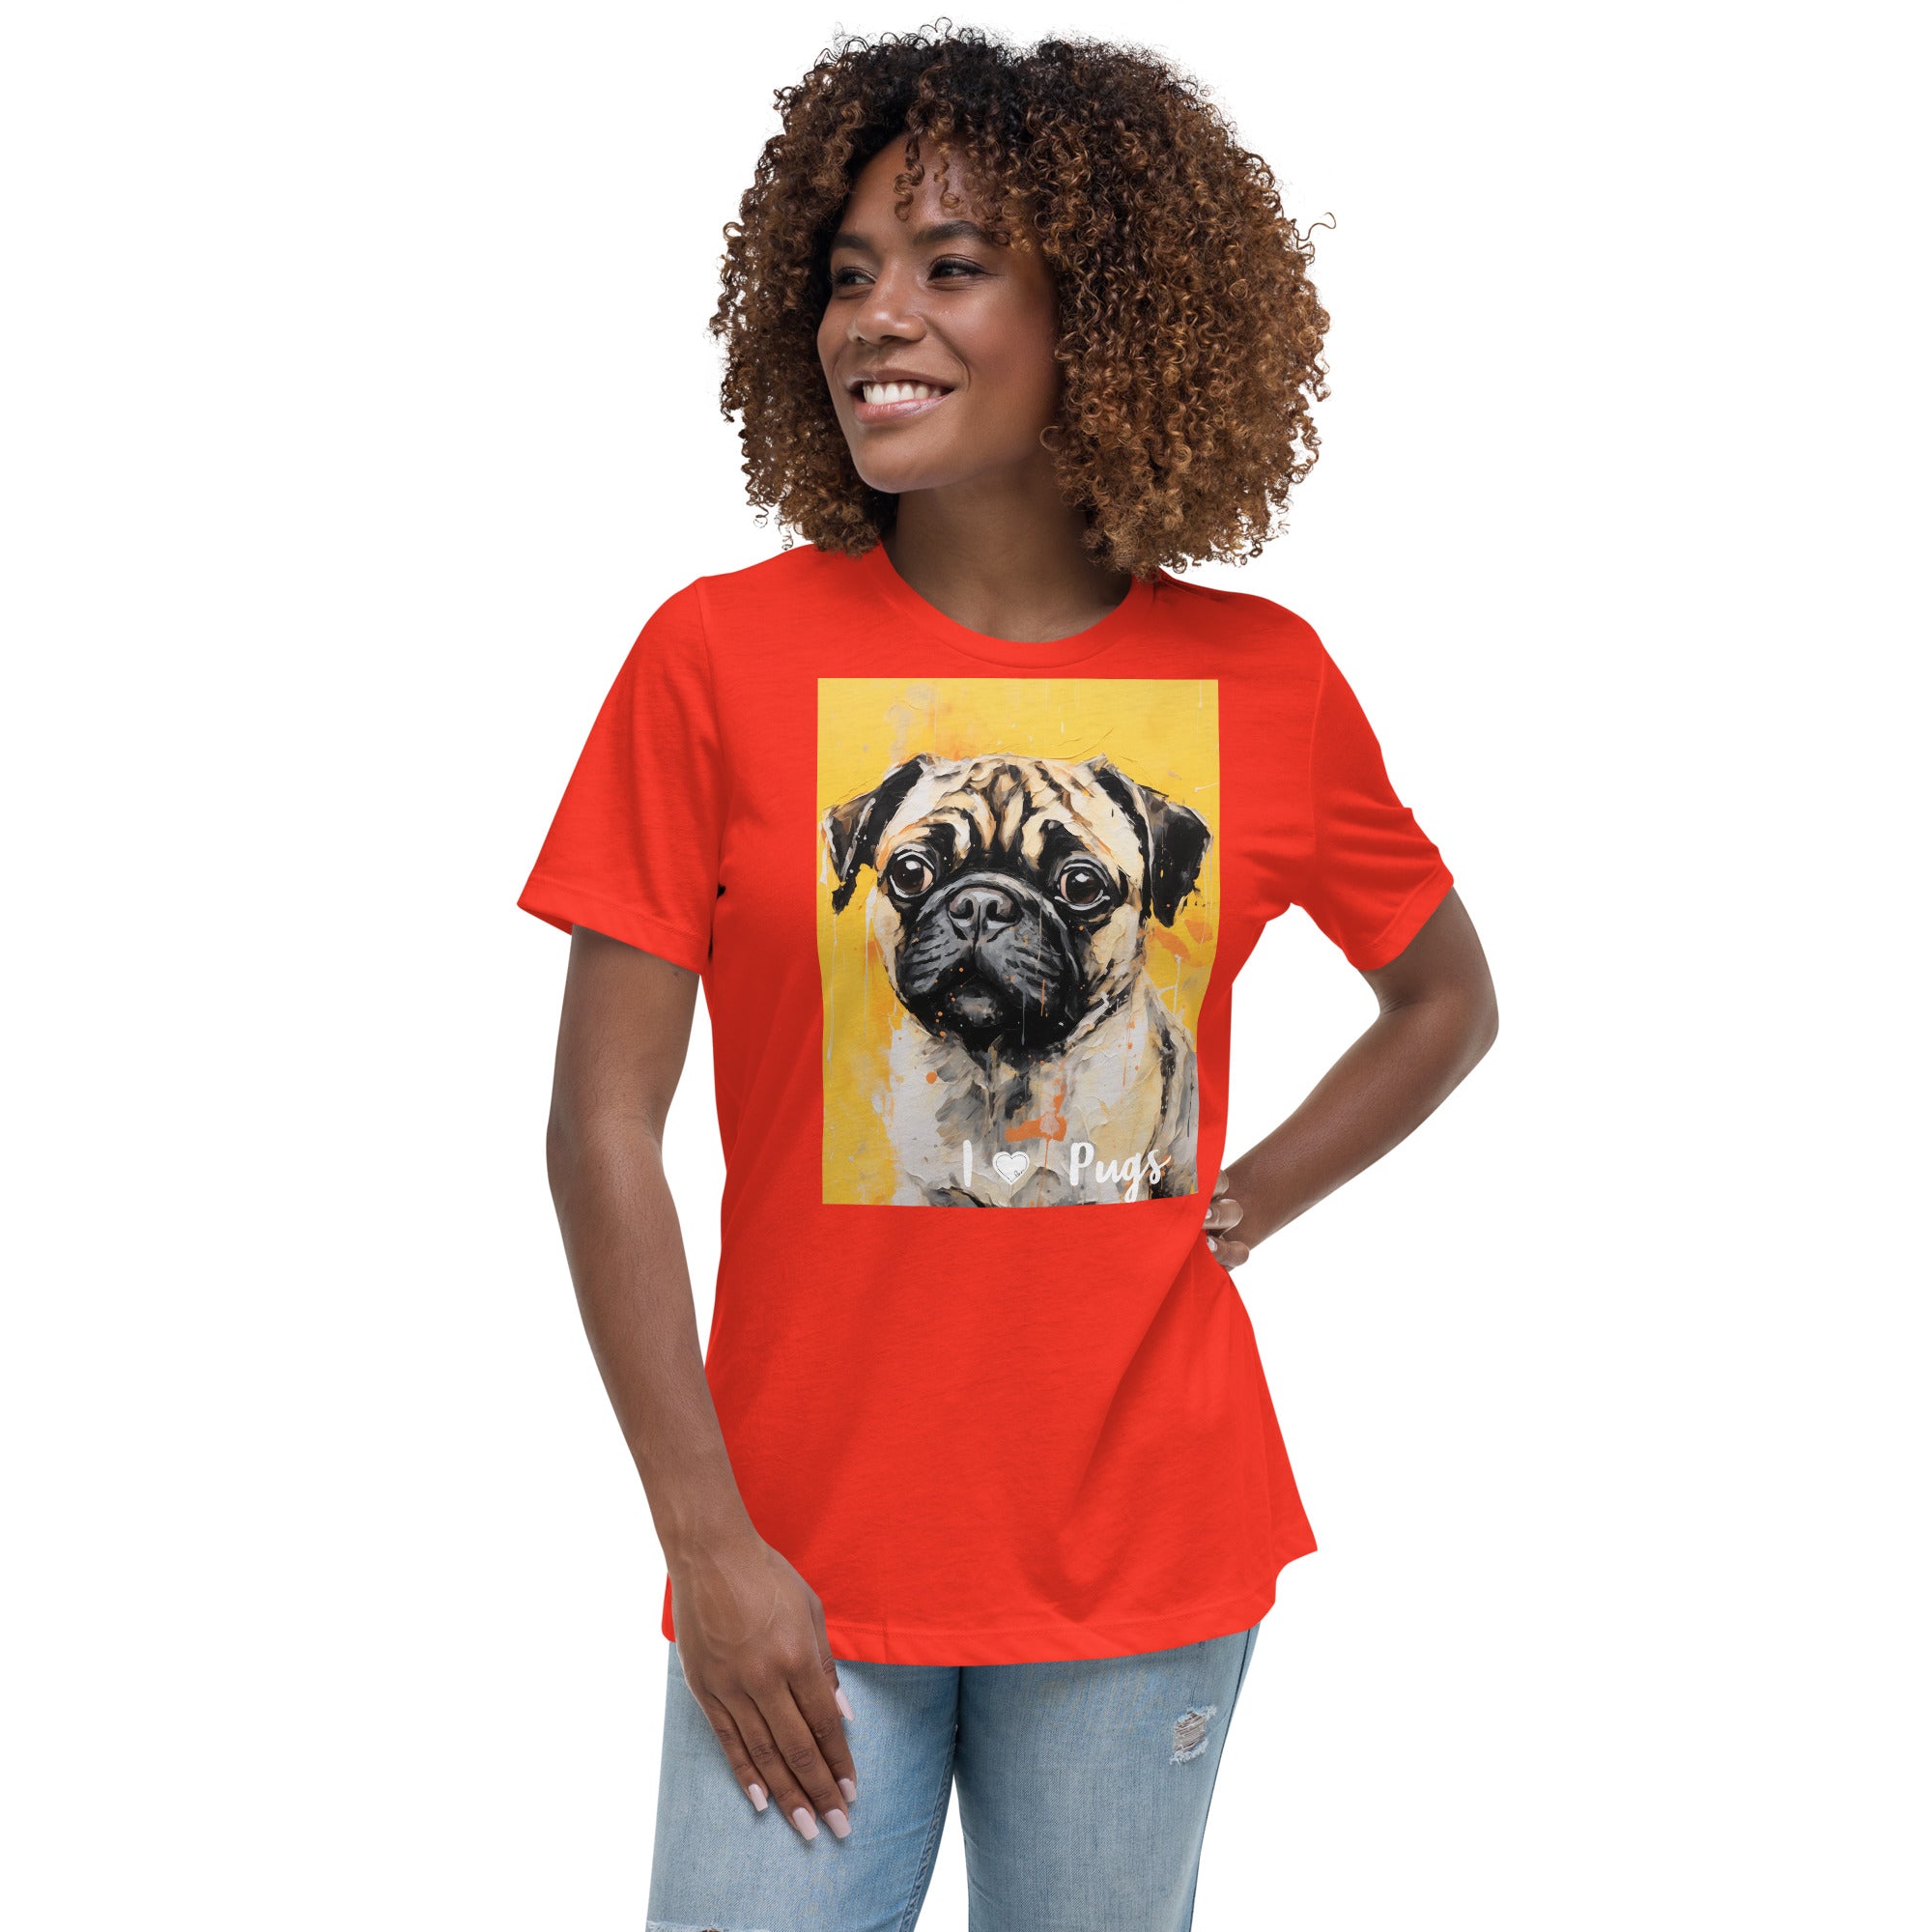 Women's Relaxed T-Shirt - I ❤ Dogs - Pug